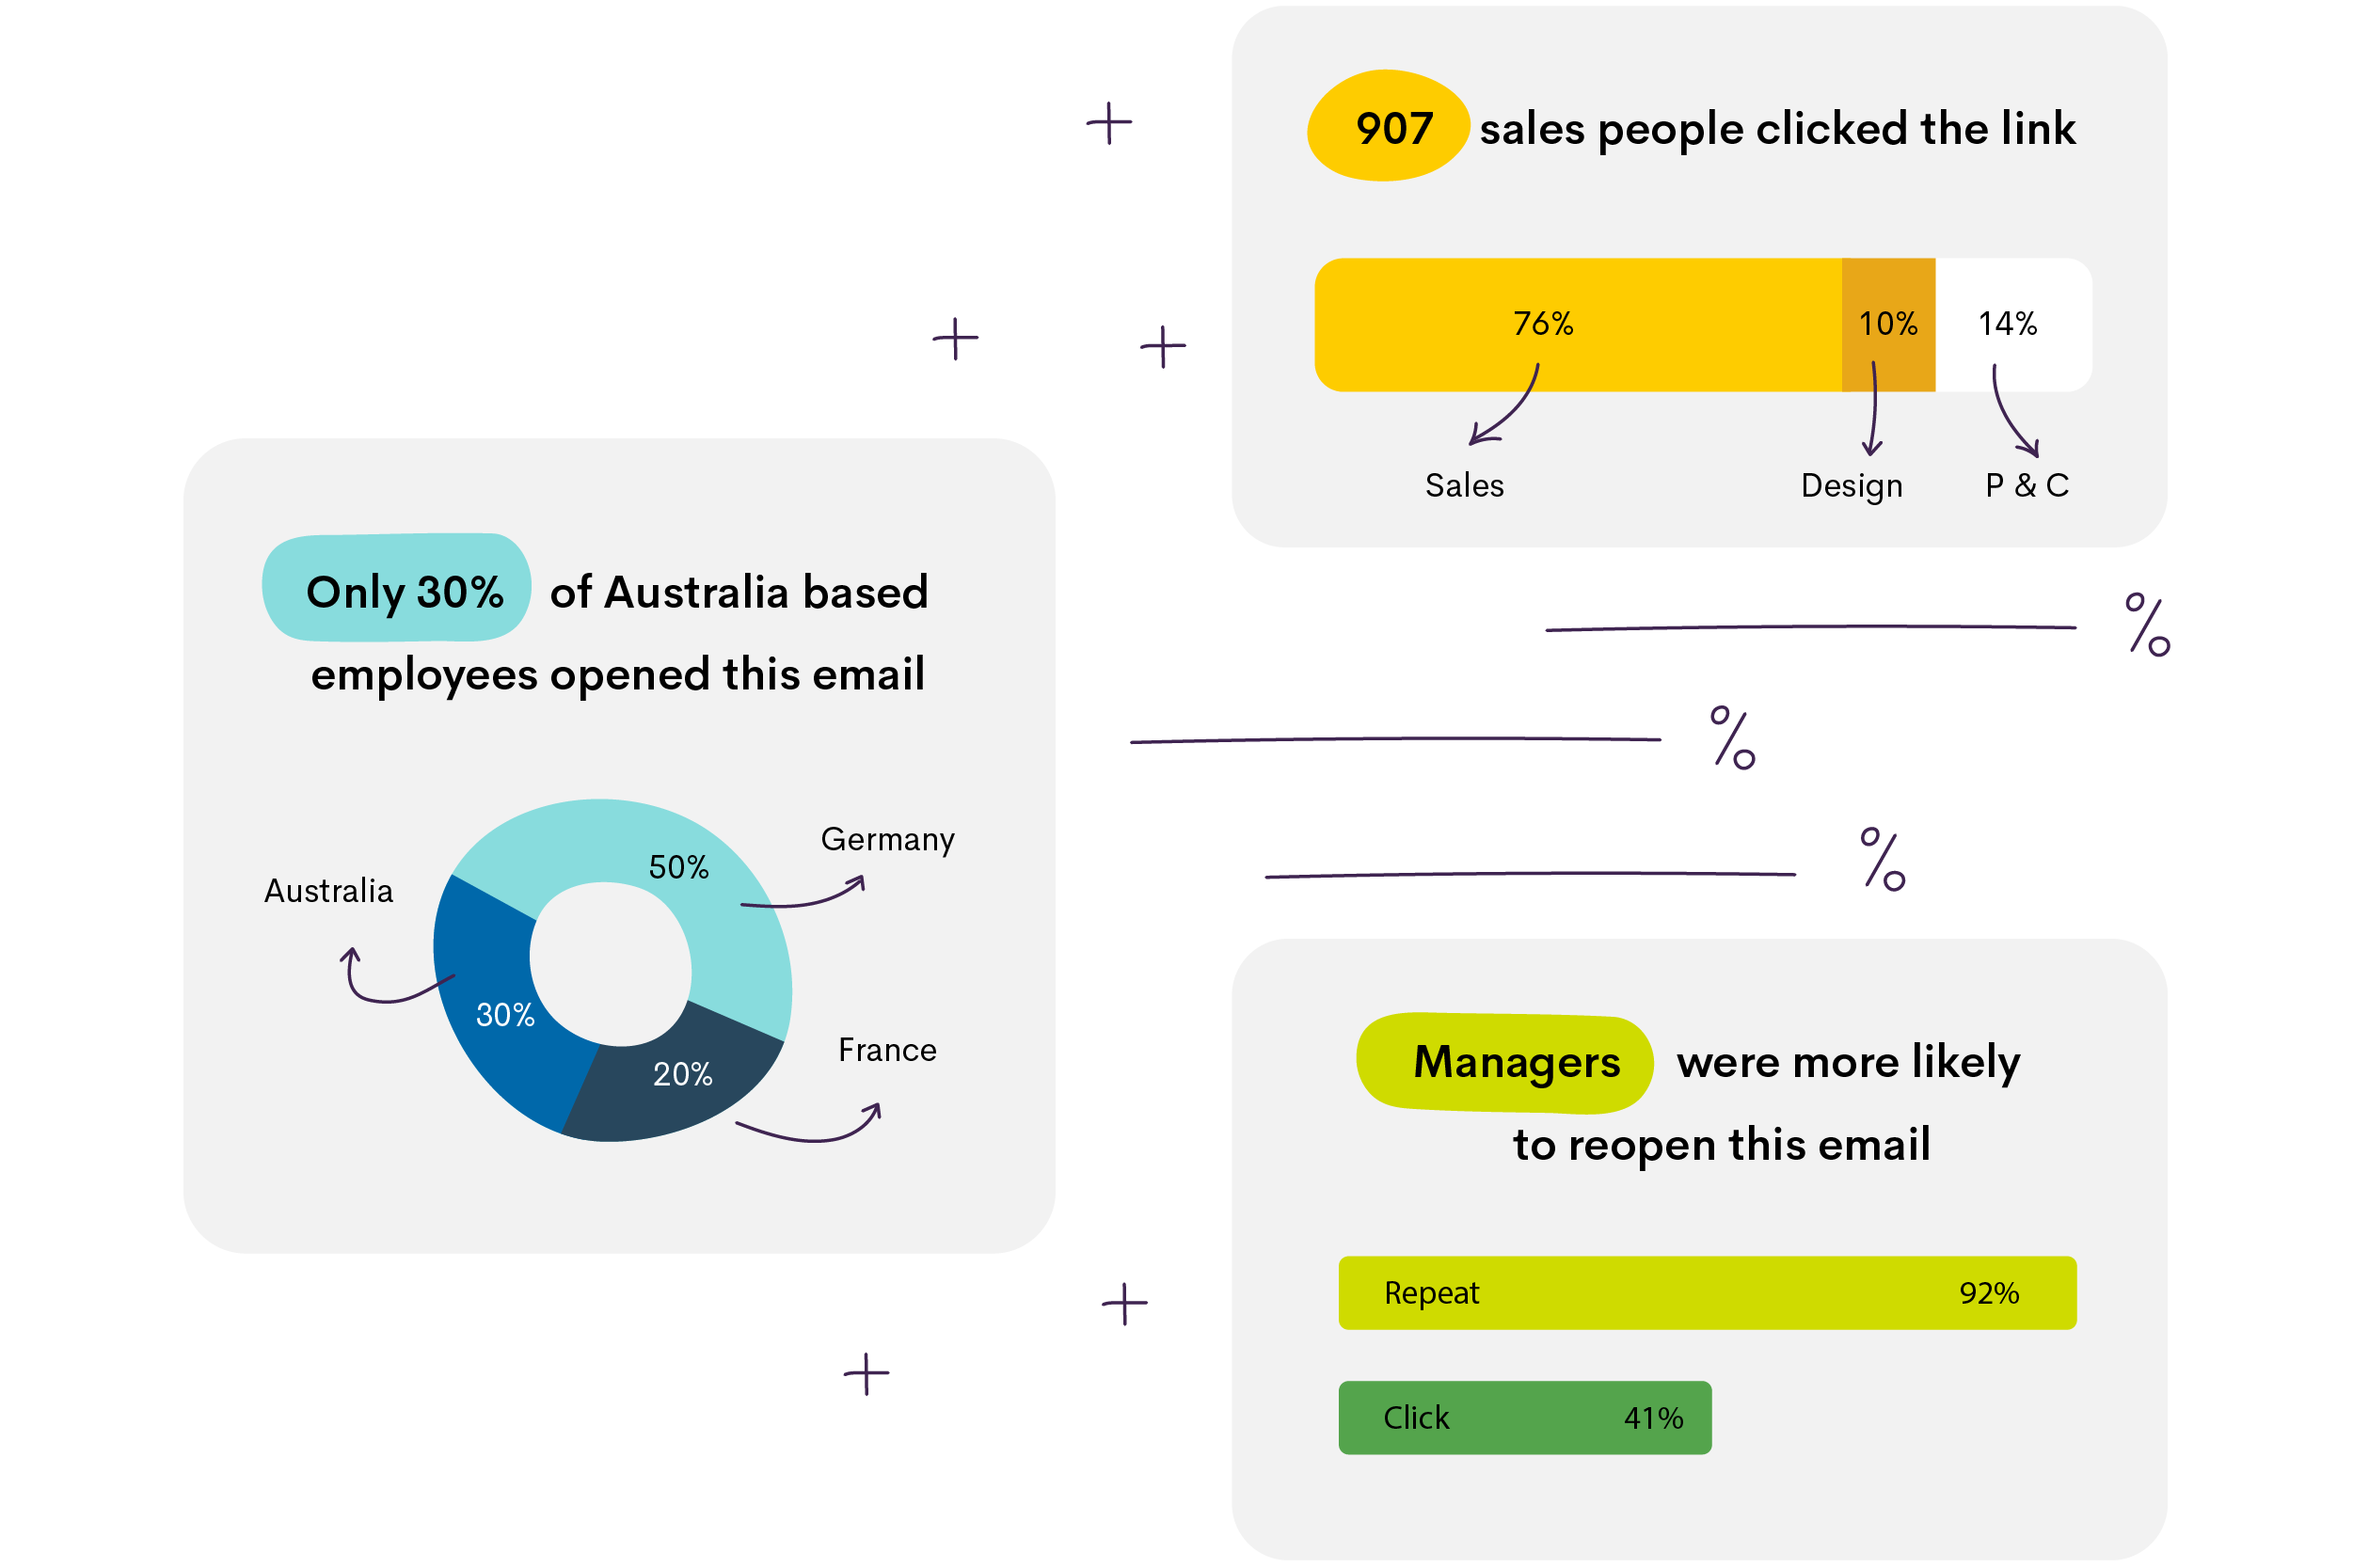 Three charts demonstrating email analytics. A pie chart labeled "Only 30% of Australia-based employees opened this email," and bar charts labeled "907 sales people clicked this link," "Managers were more likely to reopen this email